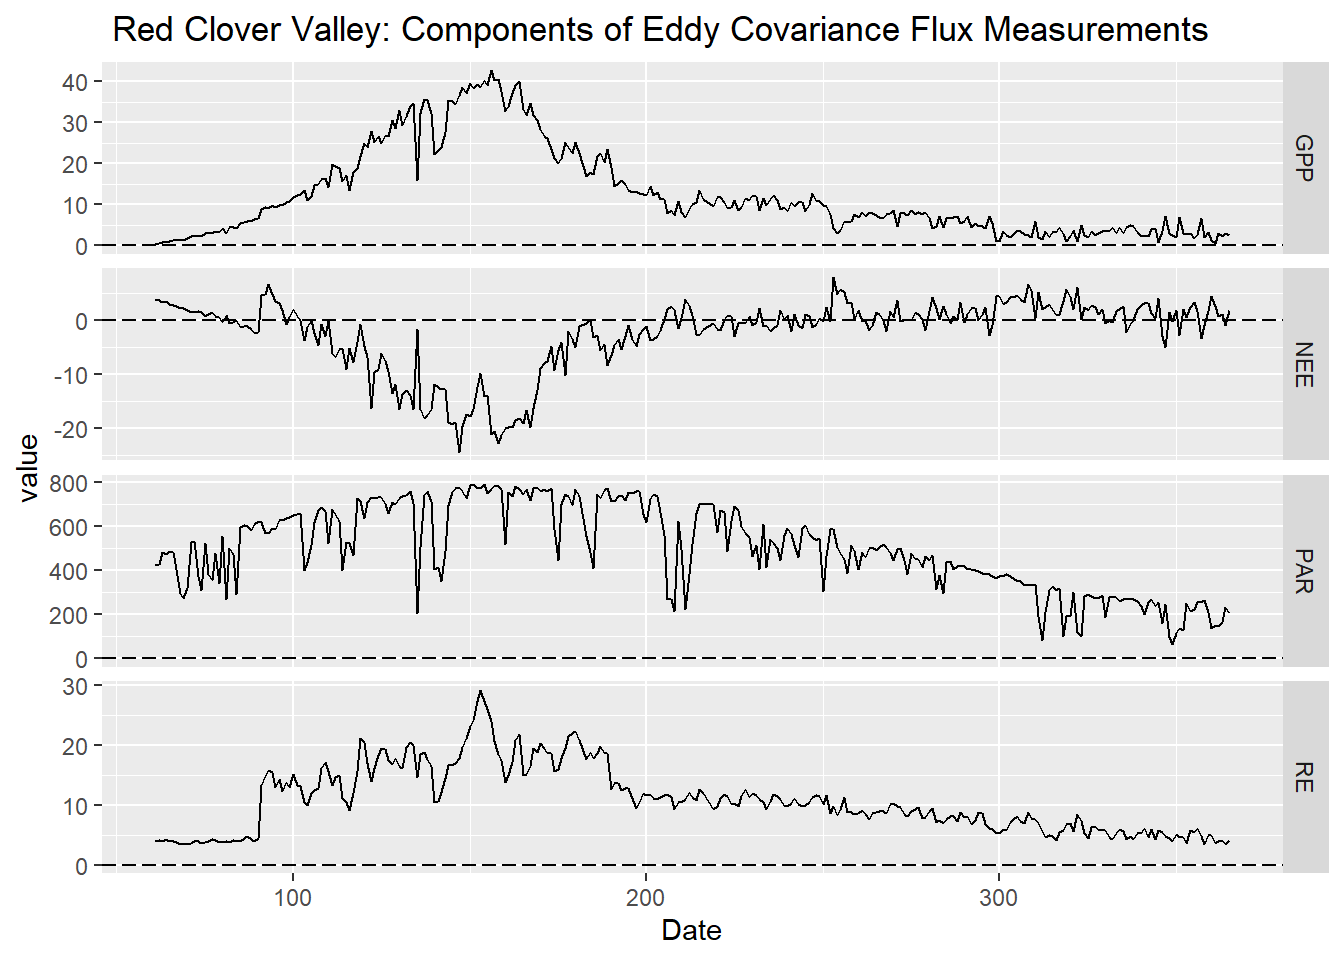 Figure 1: Components of Carbon Flux measurements collected in 30 minute intervals in 2021 and added into sum or average, from flux tower in Red Clover Valley,California. Components included NEE (Net Ecosystem Exchange), RE (Respiration Efficiency), PAR (photosynthetically active radiation), and GPP (Gross Primary Productivity) plotted against a year-day time scale with day as the unit of measure.